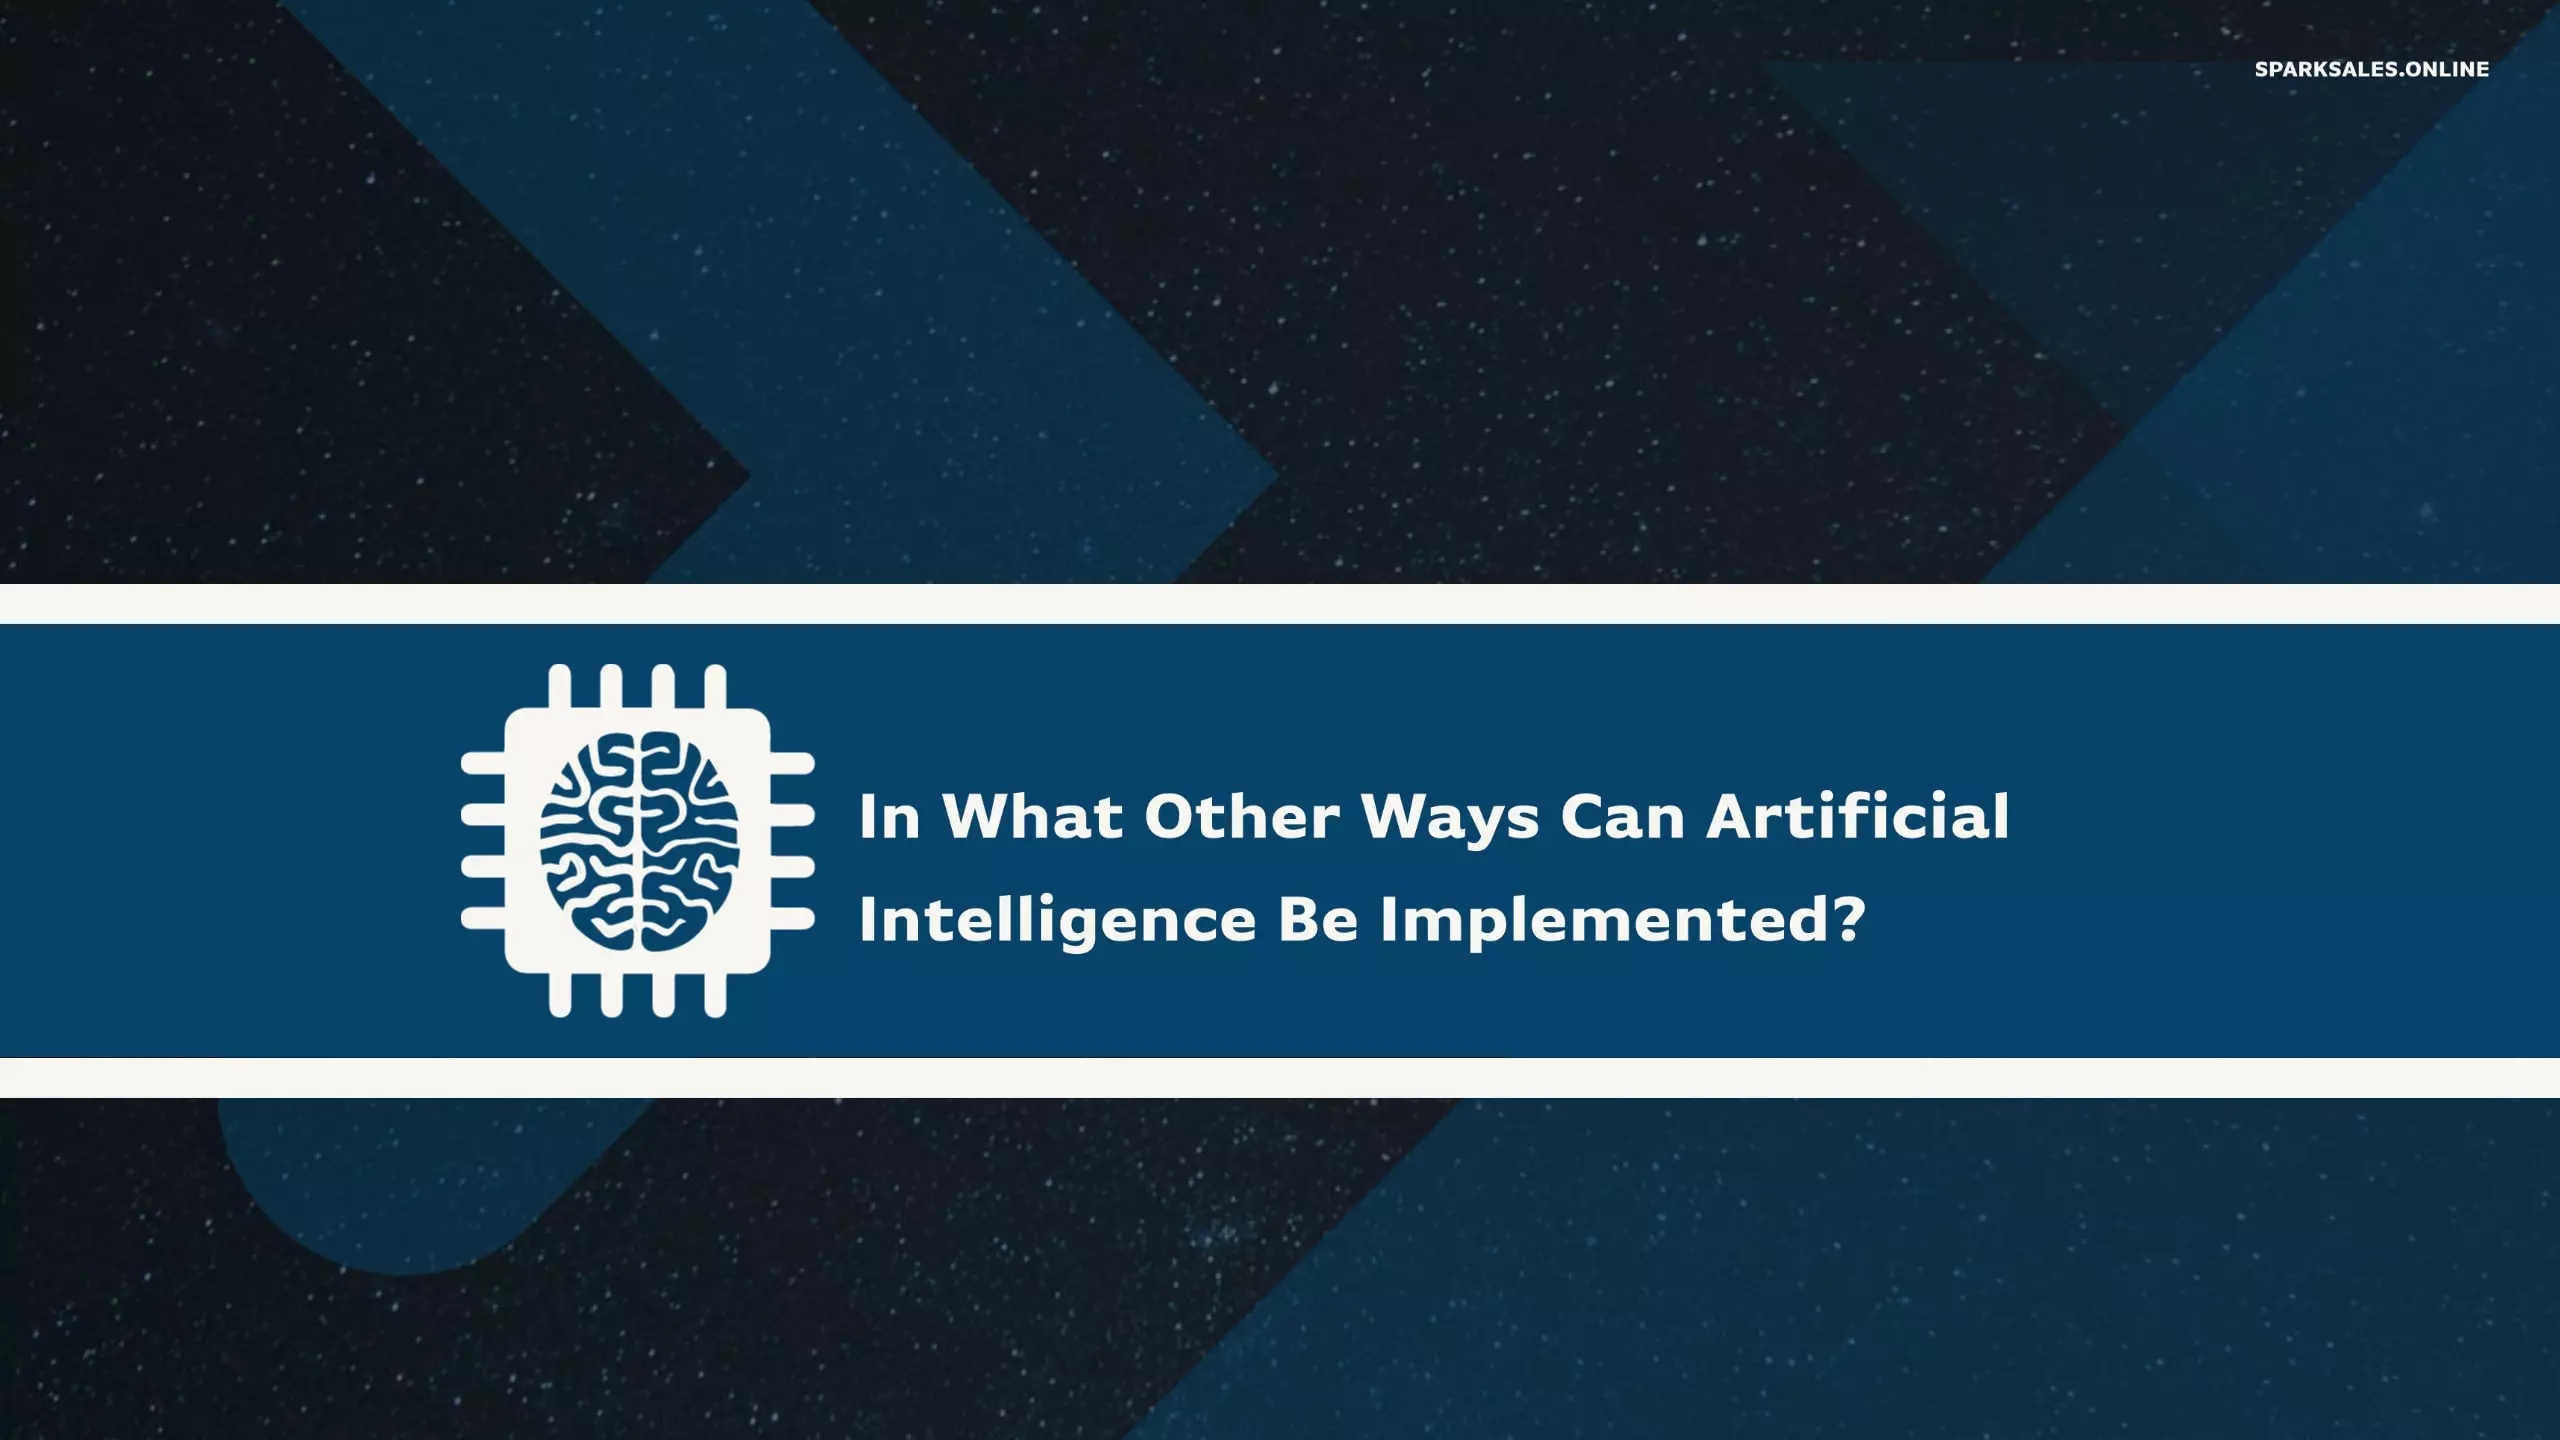 In What Other Ways Can Artificial Intelligence Be Implemented?